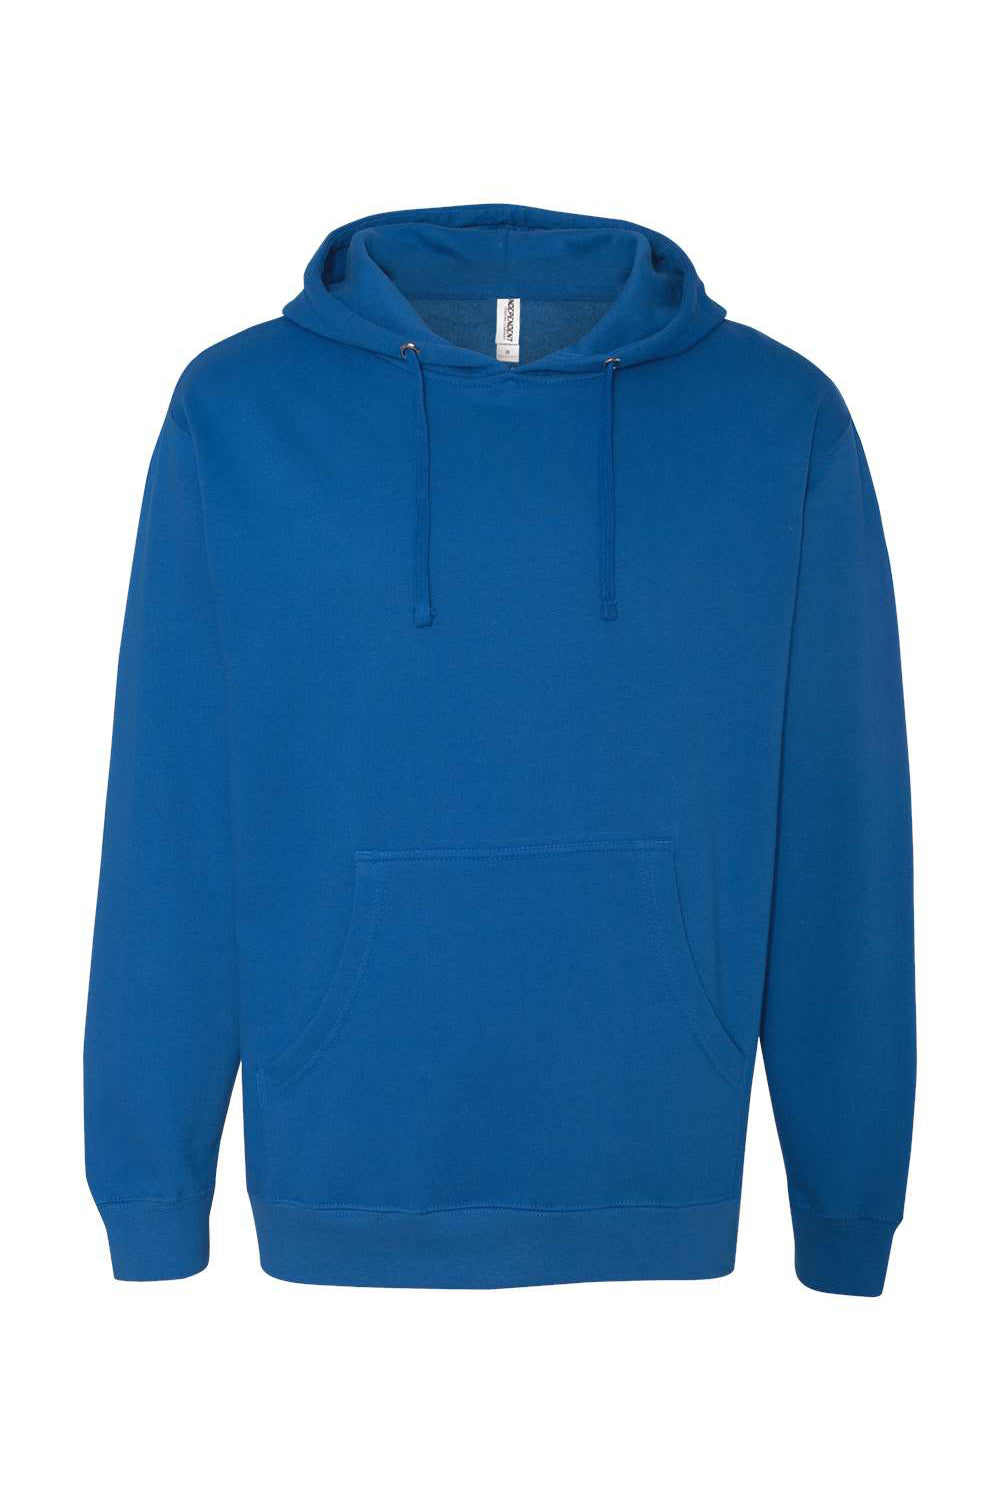 Independent Trading Co. SS4500 Mens Hooded Sweatshirt Hoodie Royal Blue Flat Front